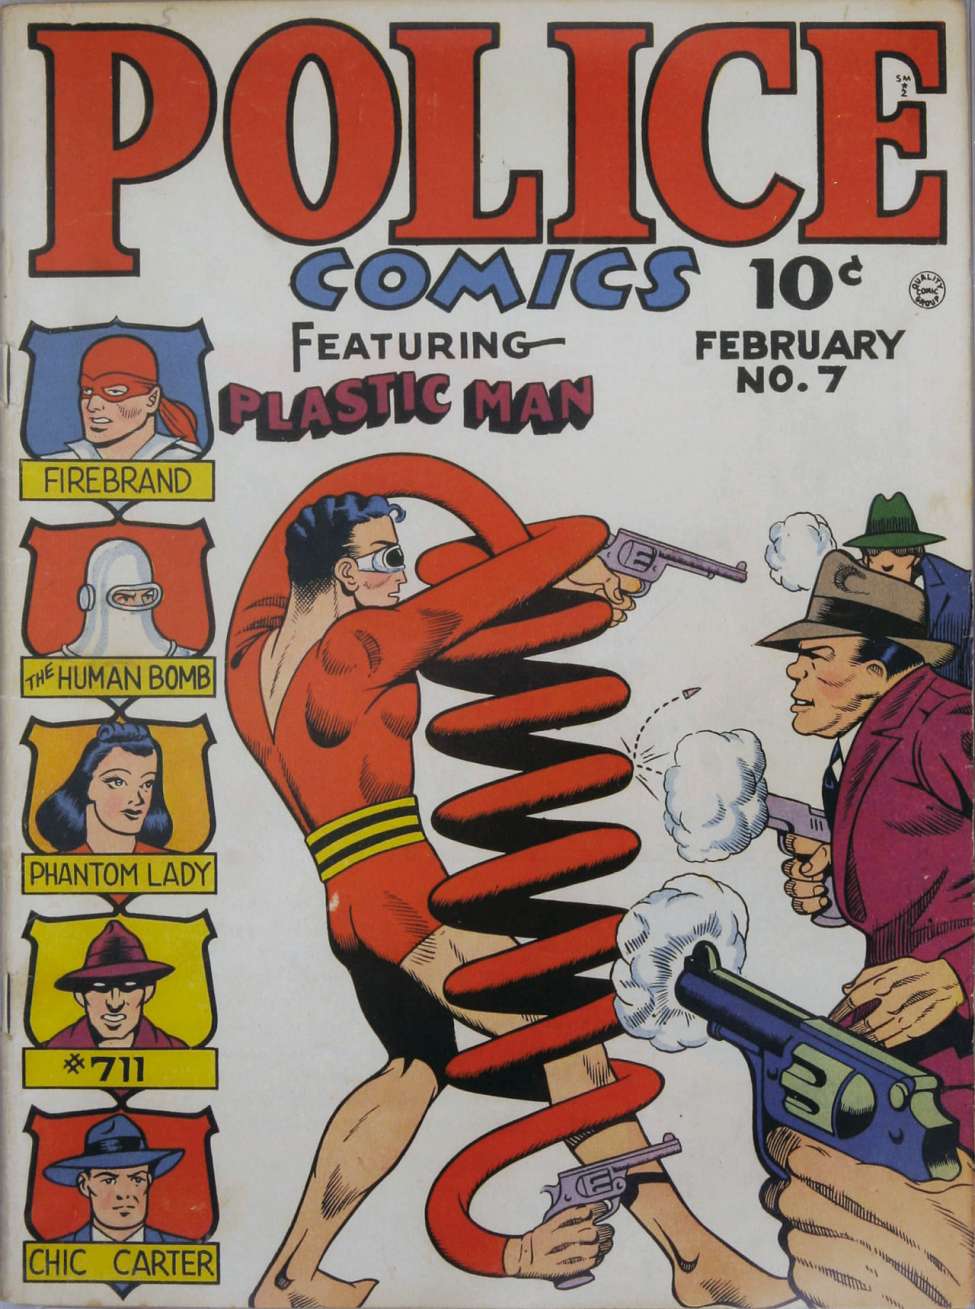 Book Cover For Police Comics 7 (alt) - Version 2